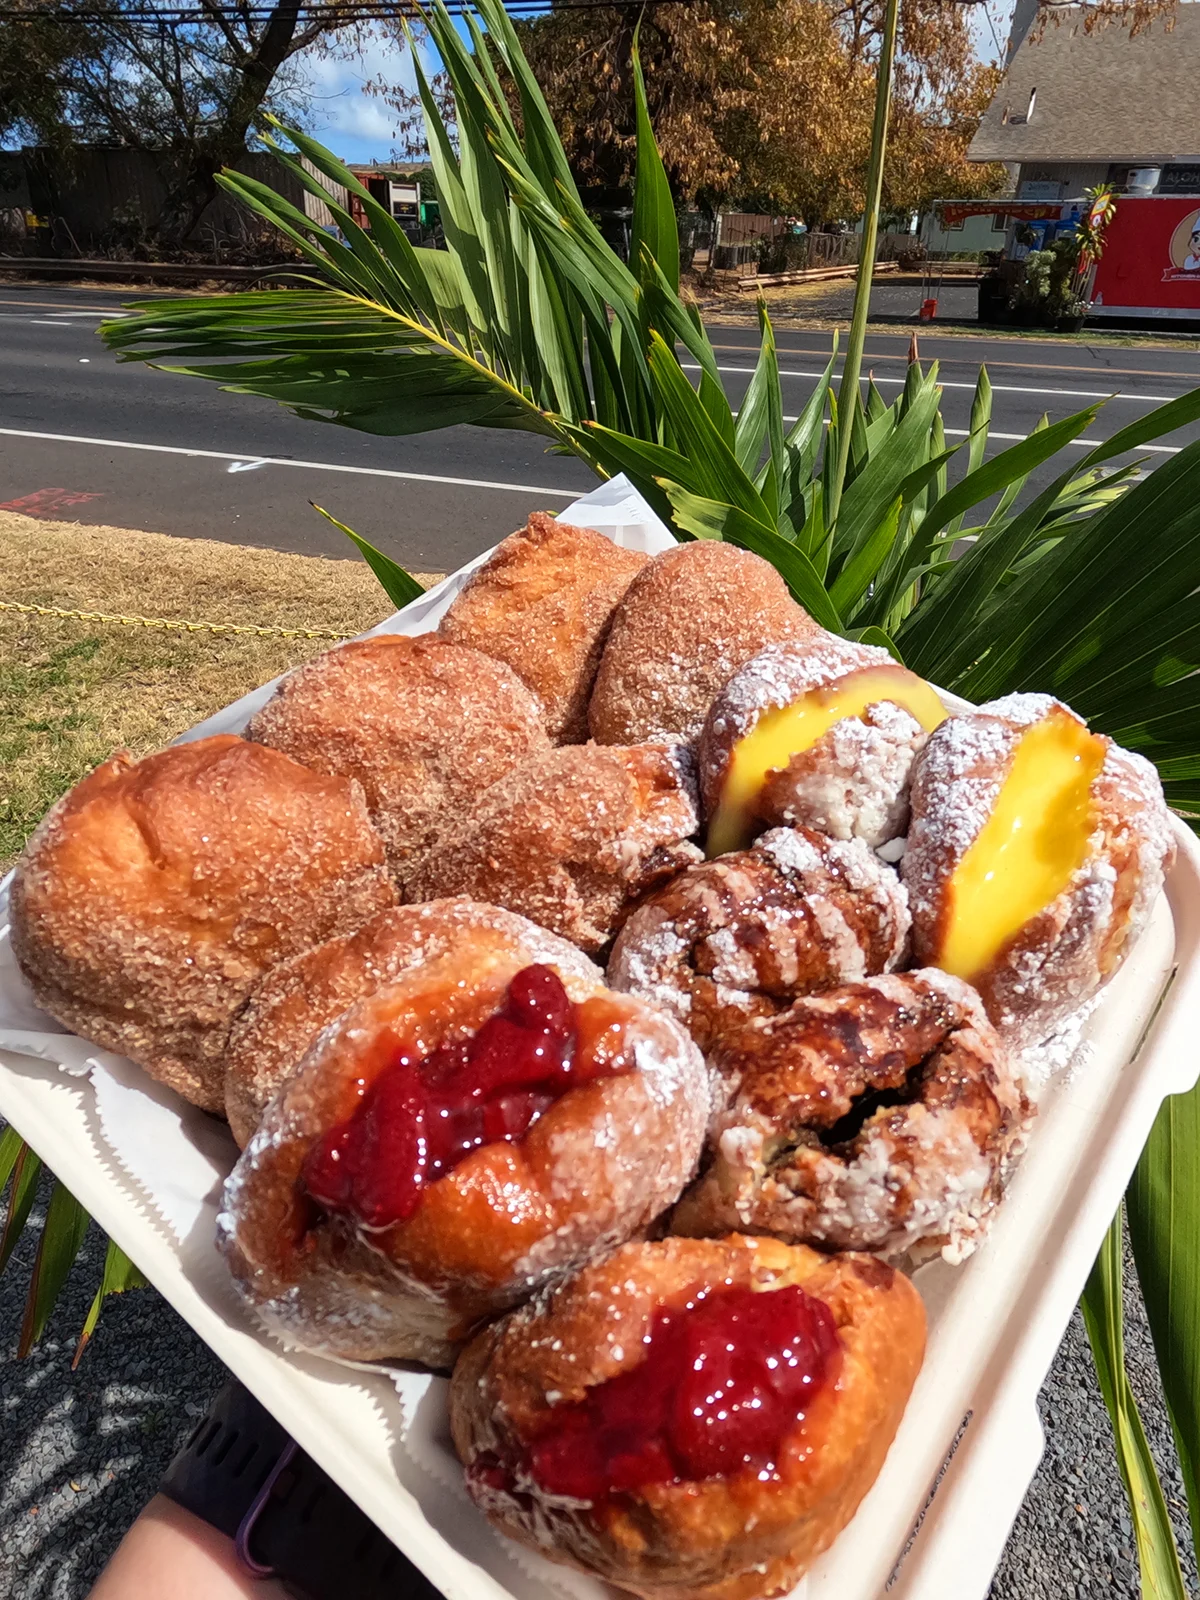 box of malasadas with fruit or sugar trees and road in background